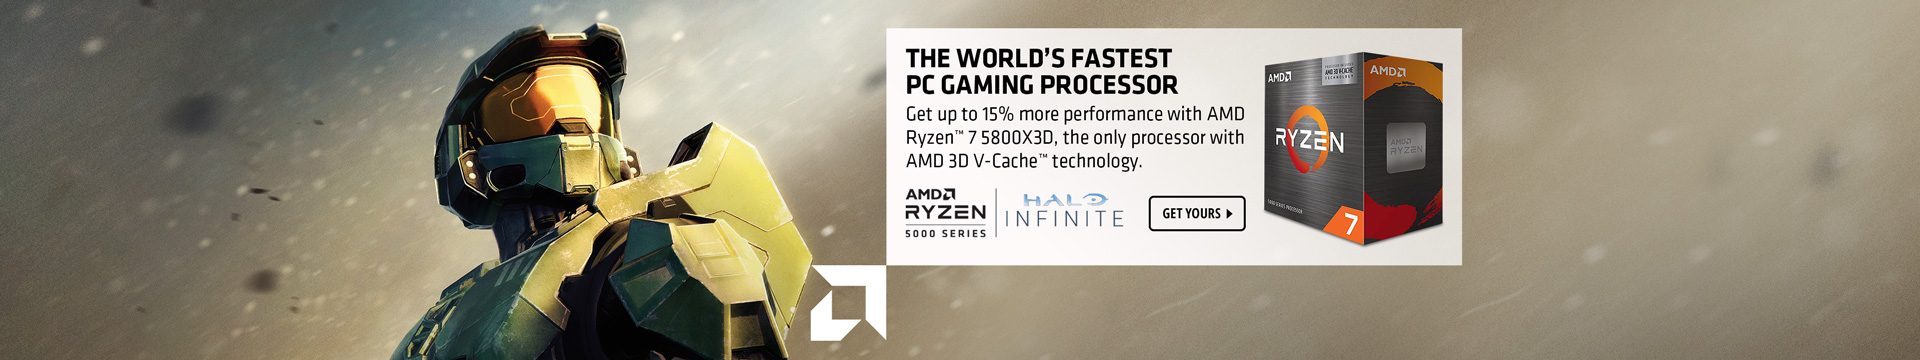 The world’s fastest PC gaming processor